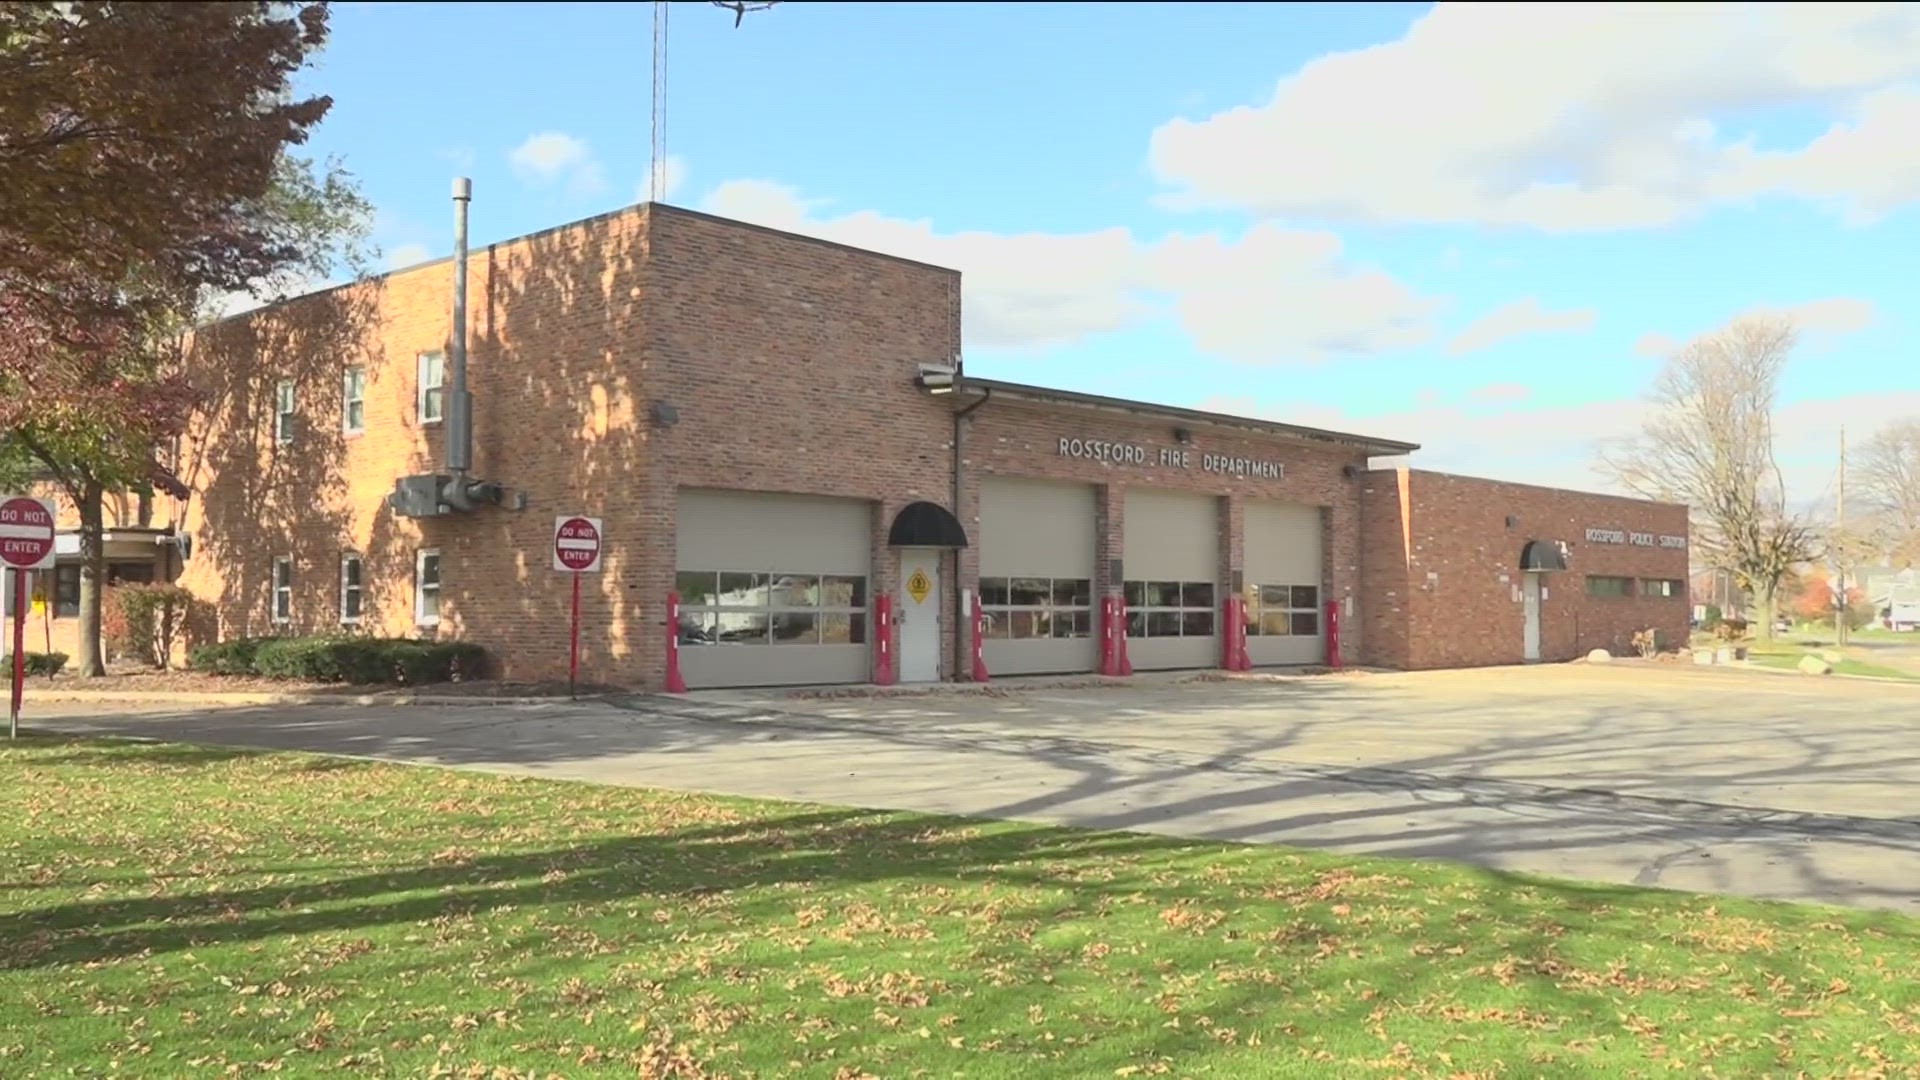 Multiple days a month, Rossford residents rely on mutual aid response for emergencies as Rossford officials work on plans to make the fire department full-time.